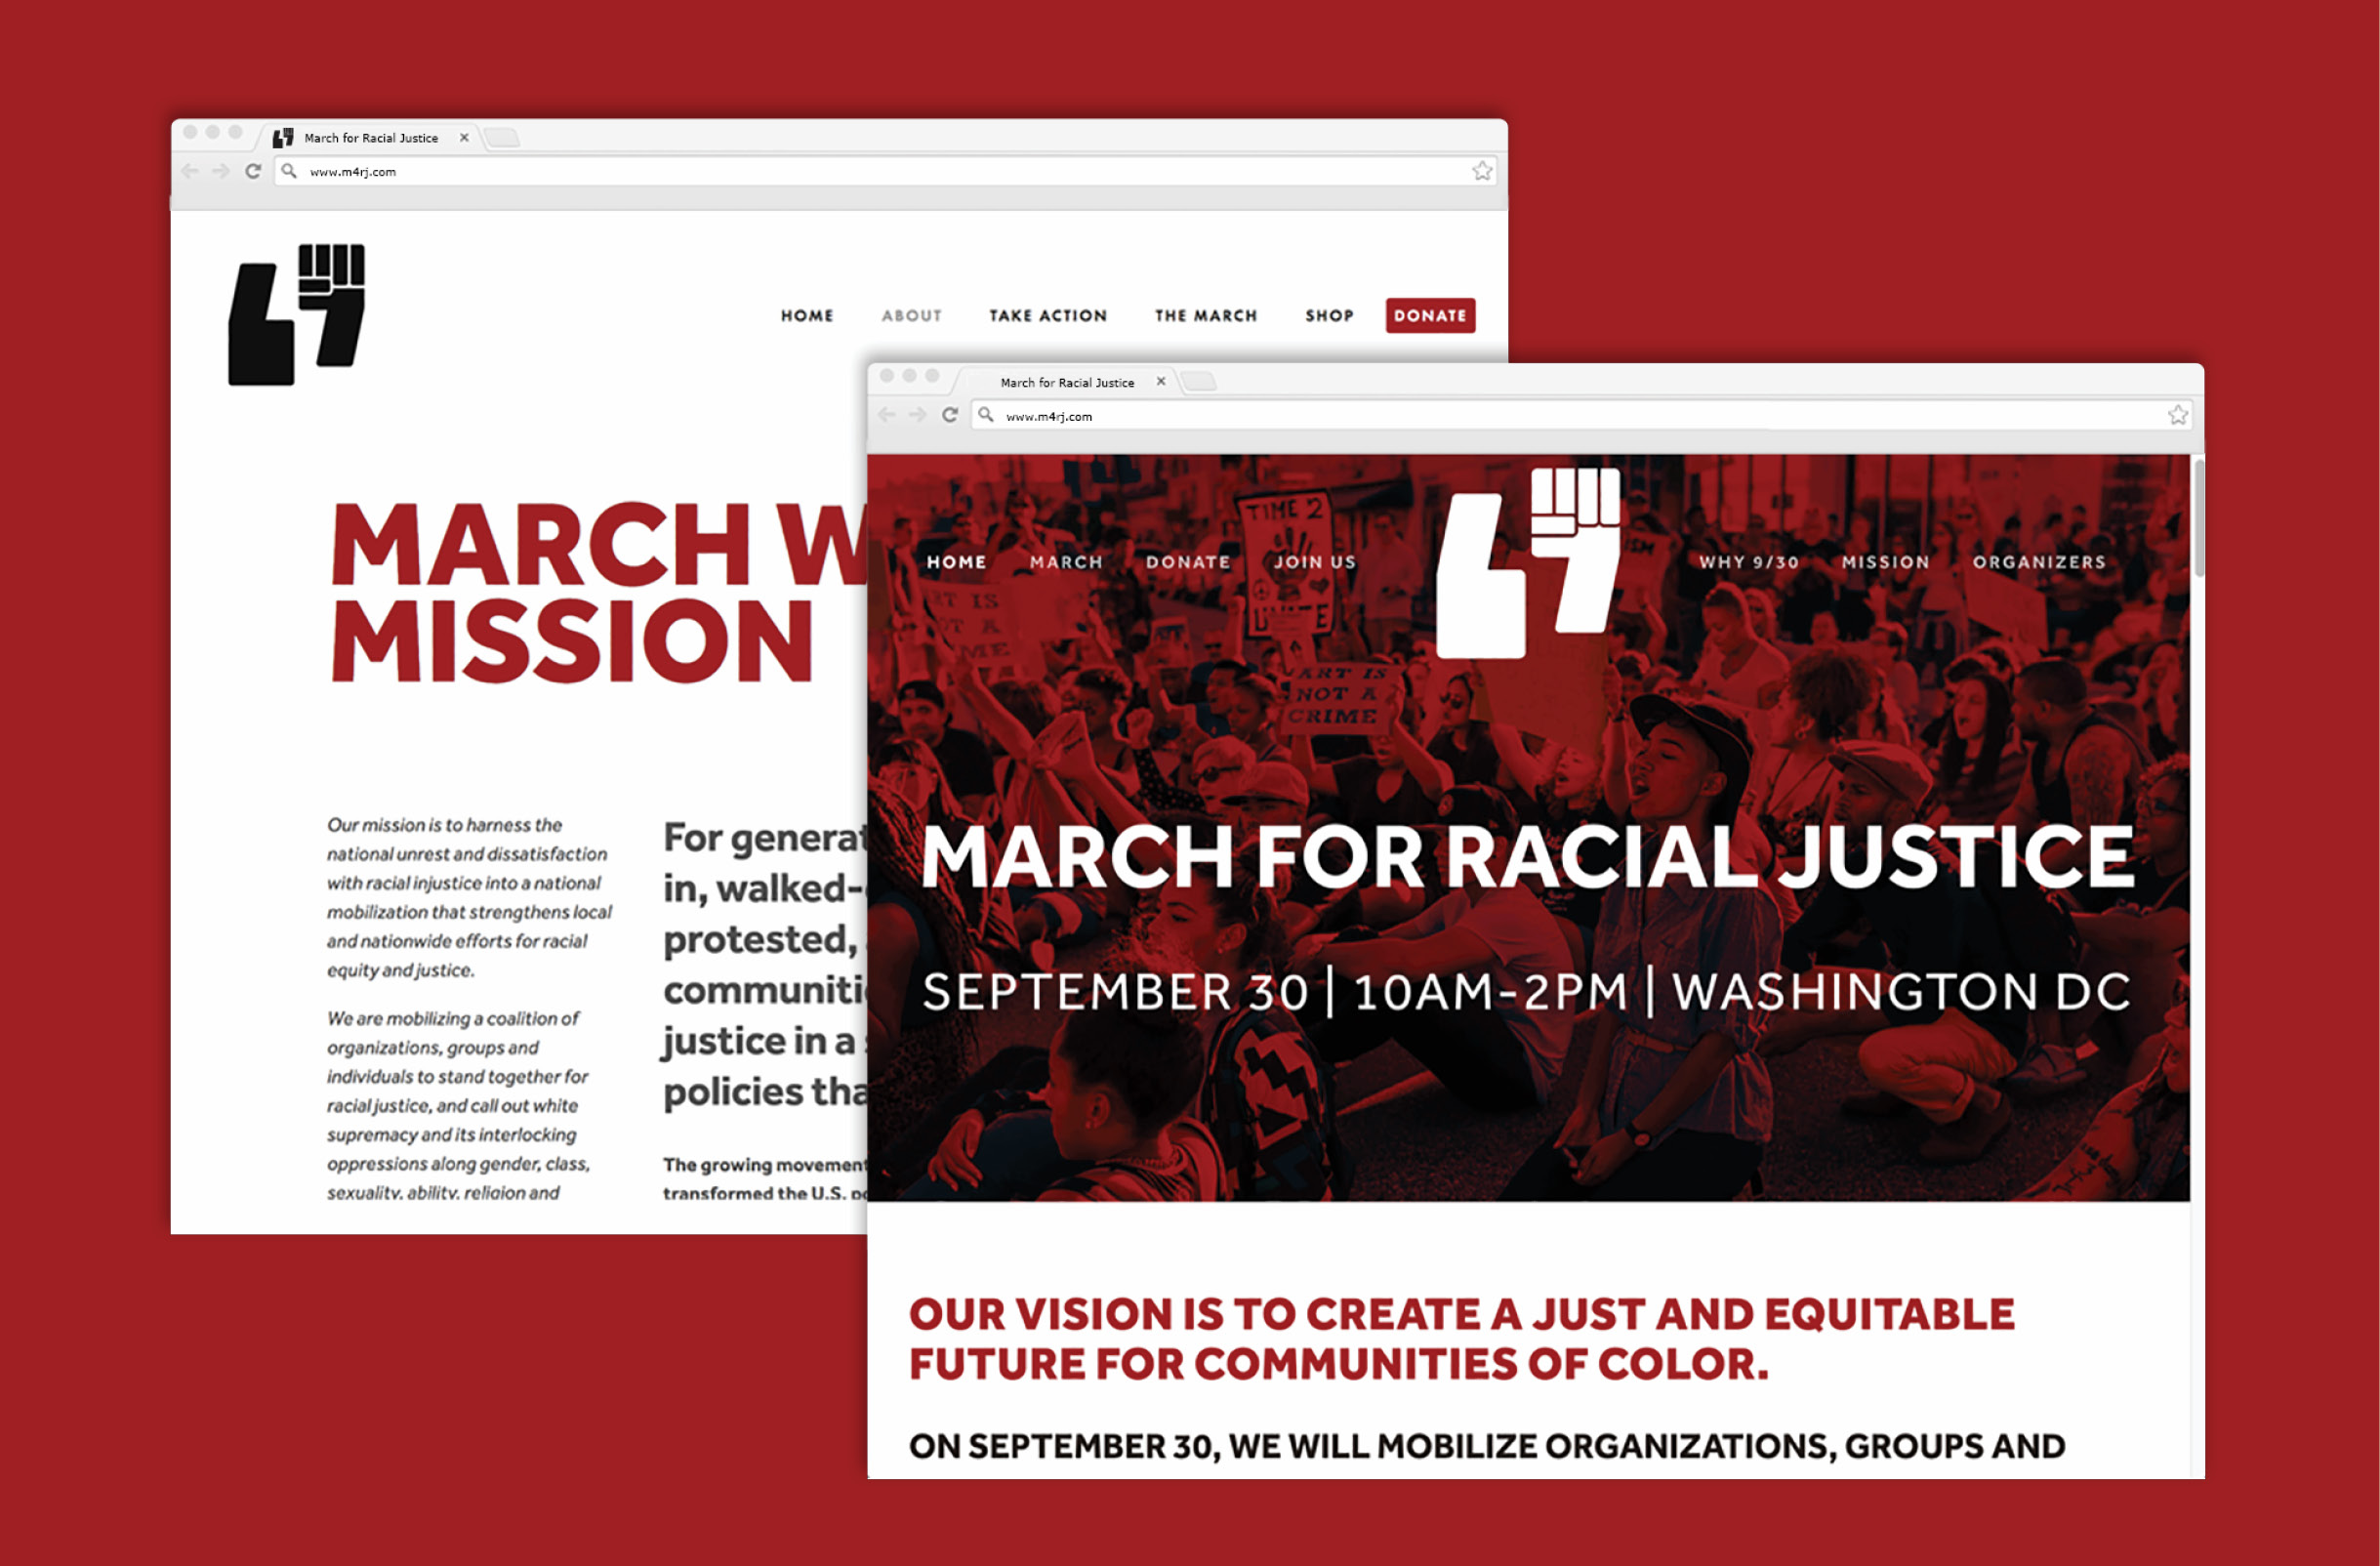 Landing page and supporting page designs for the M4RJ website. The home page has a red tinted header image of protesters with the M4RJ logo in white on top of it. Below the image reads “Our vision is to create a just and equitable future for communities of color.” The supporting page describes the event as a “March with a Mission”.